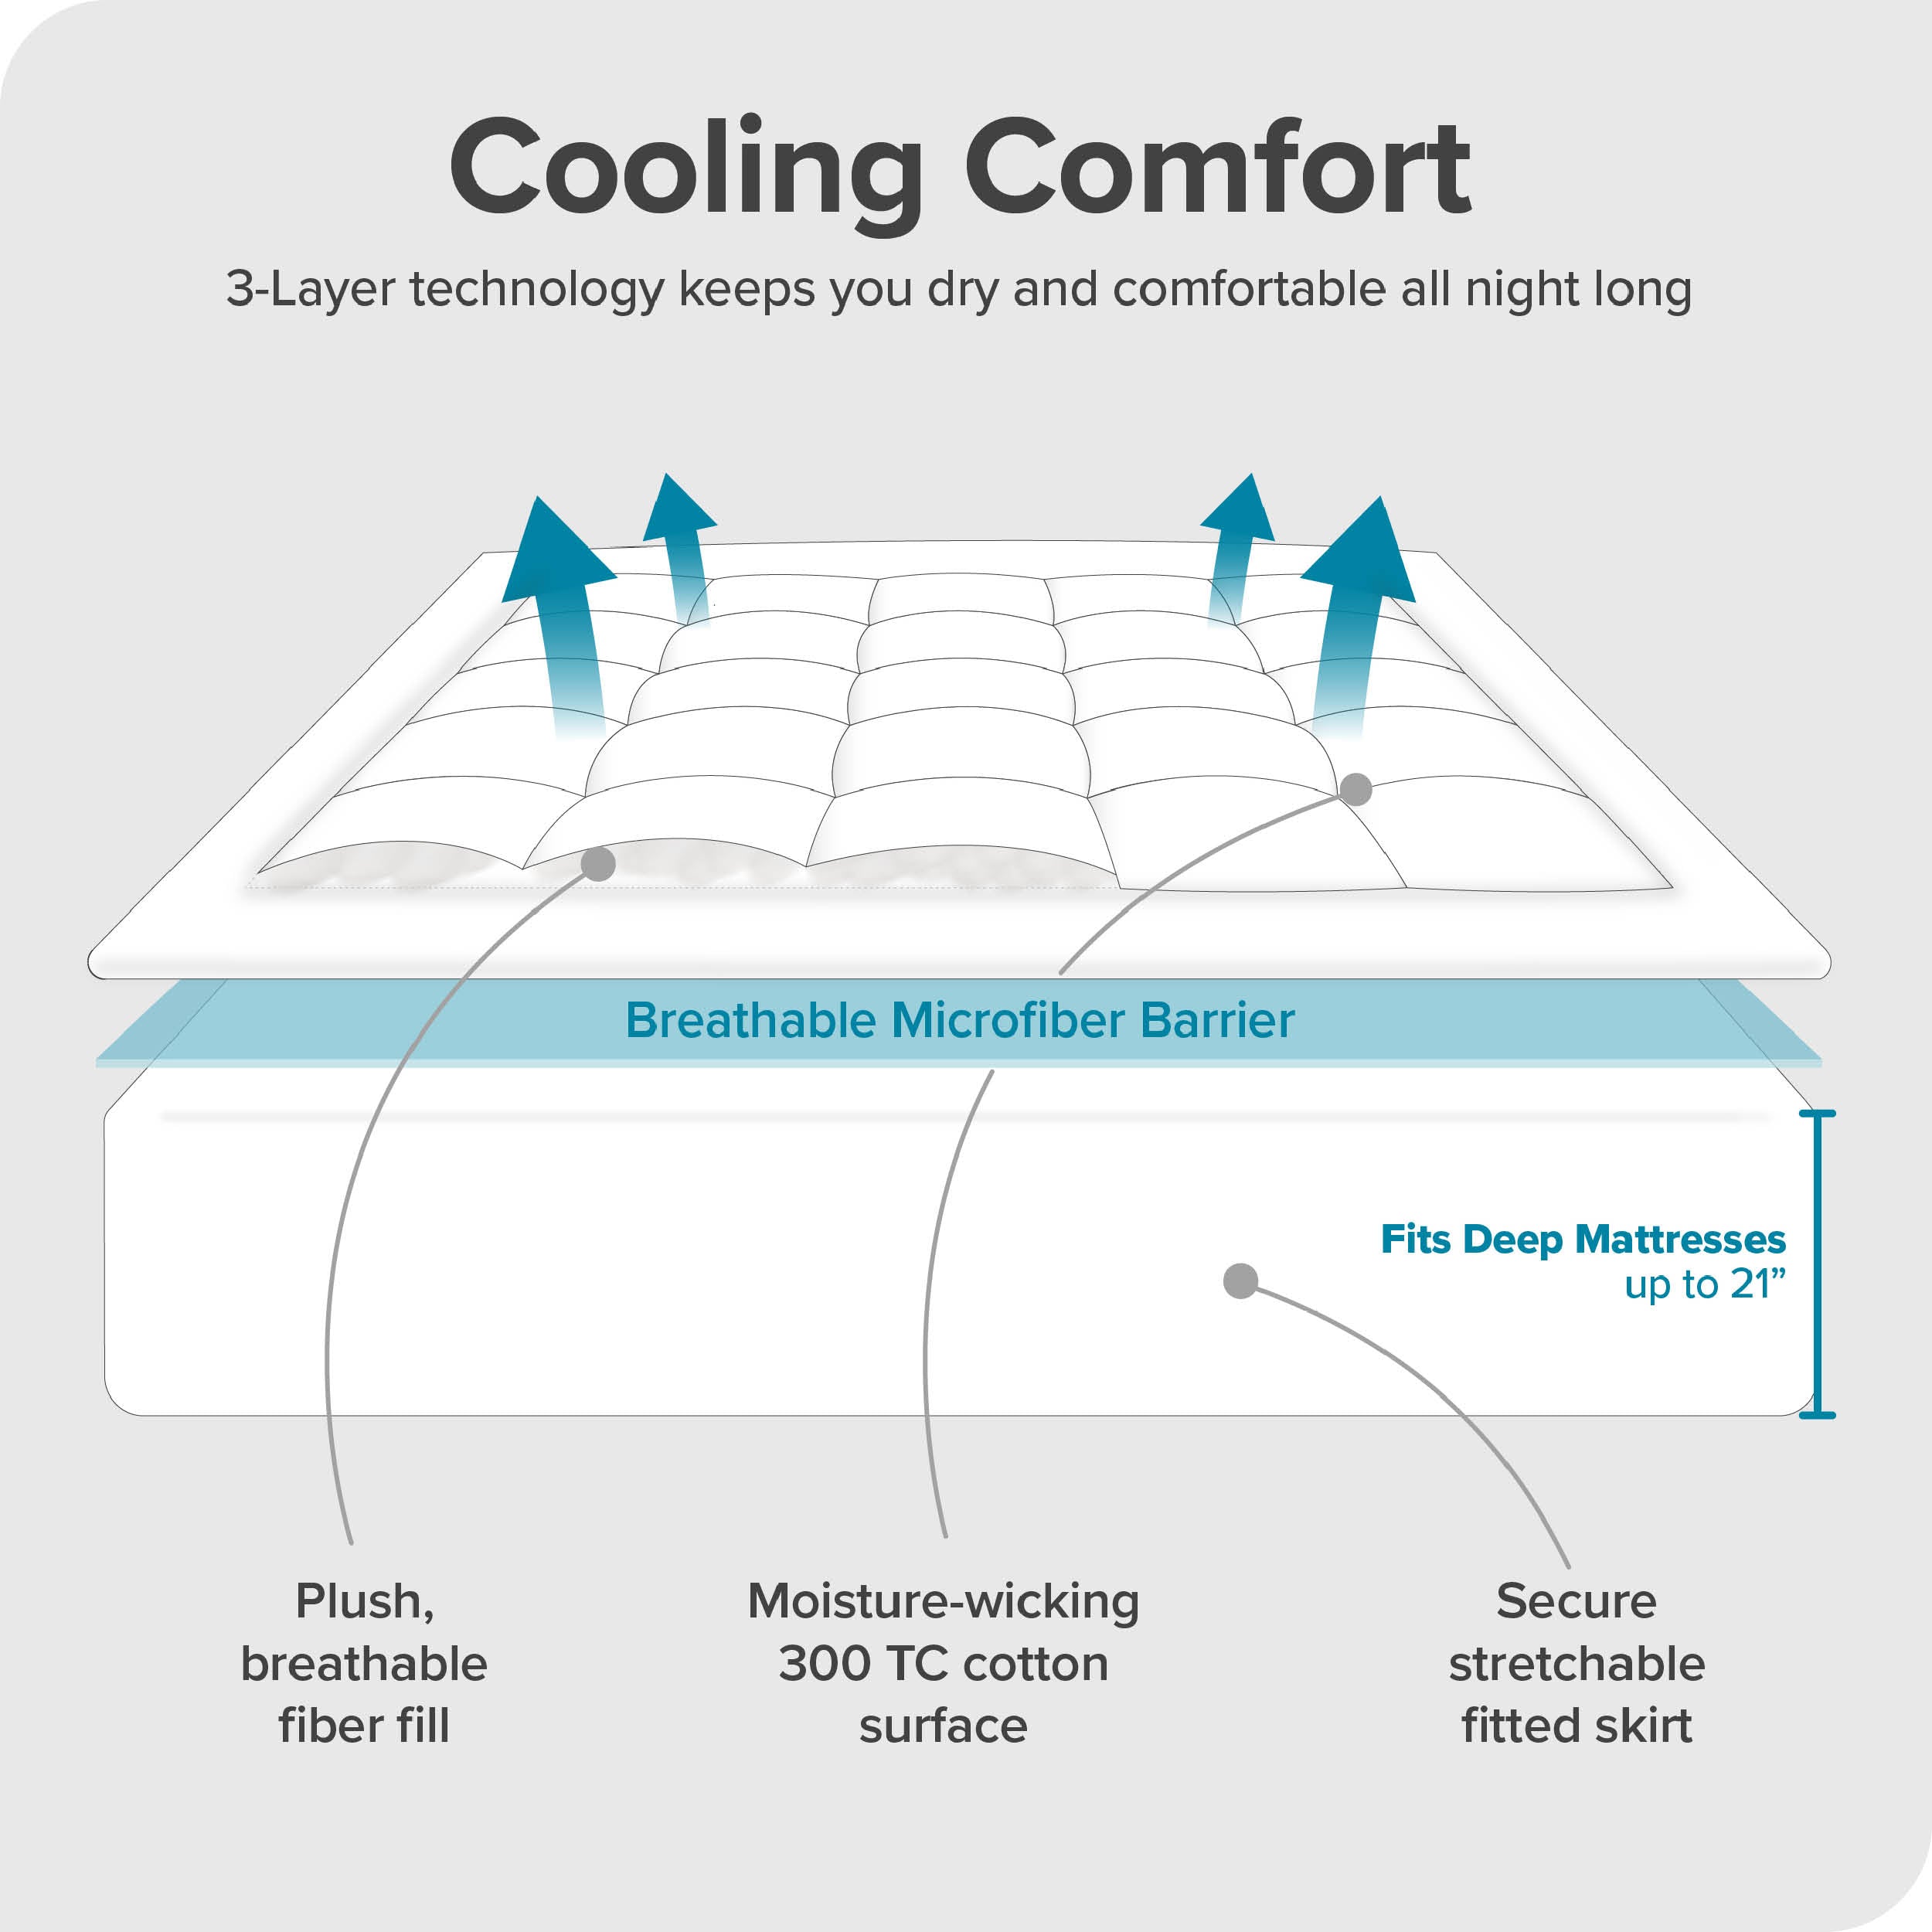 Diagram explaining the layers and features of the mattress pad. Plush breathable fiber fill, moisture-wicking 300 TC cotton surface and secure stretchable fitted skirt.